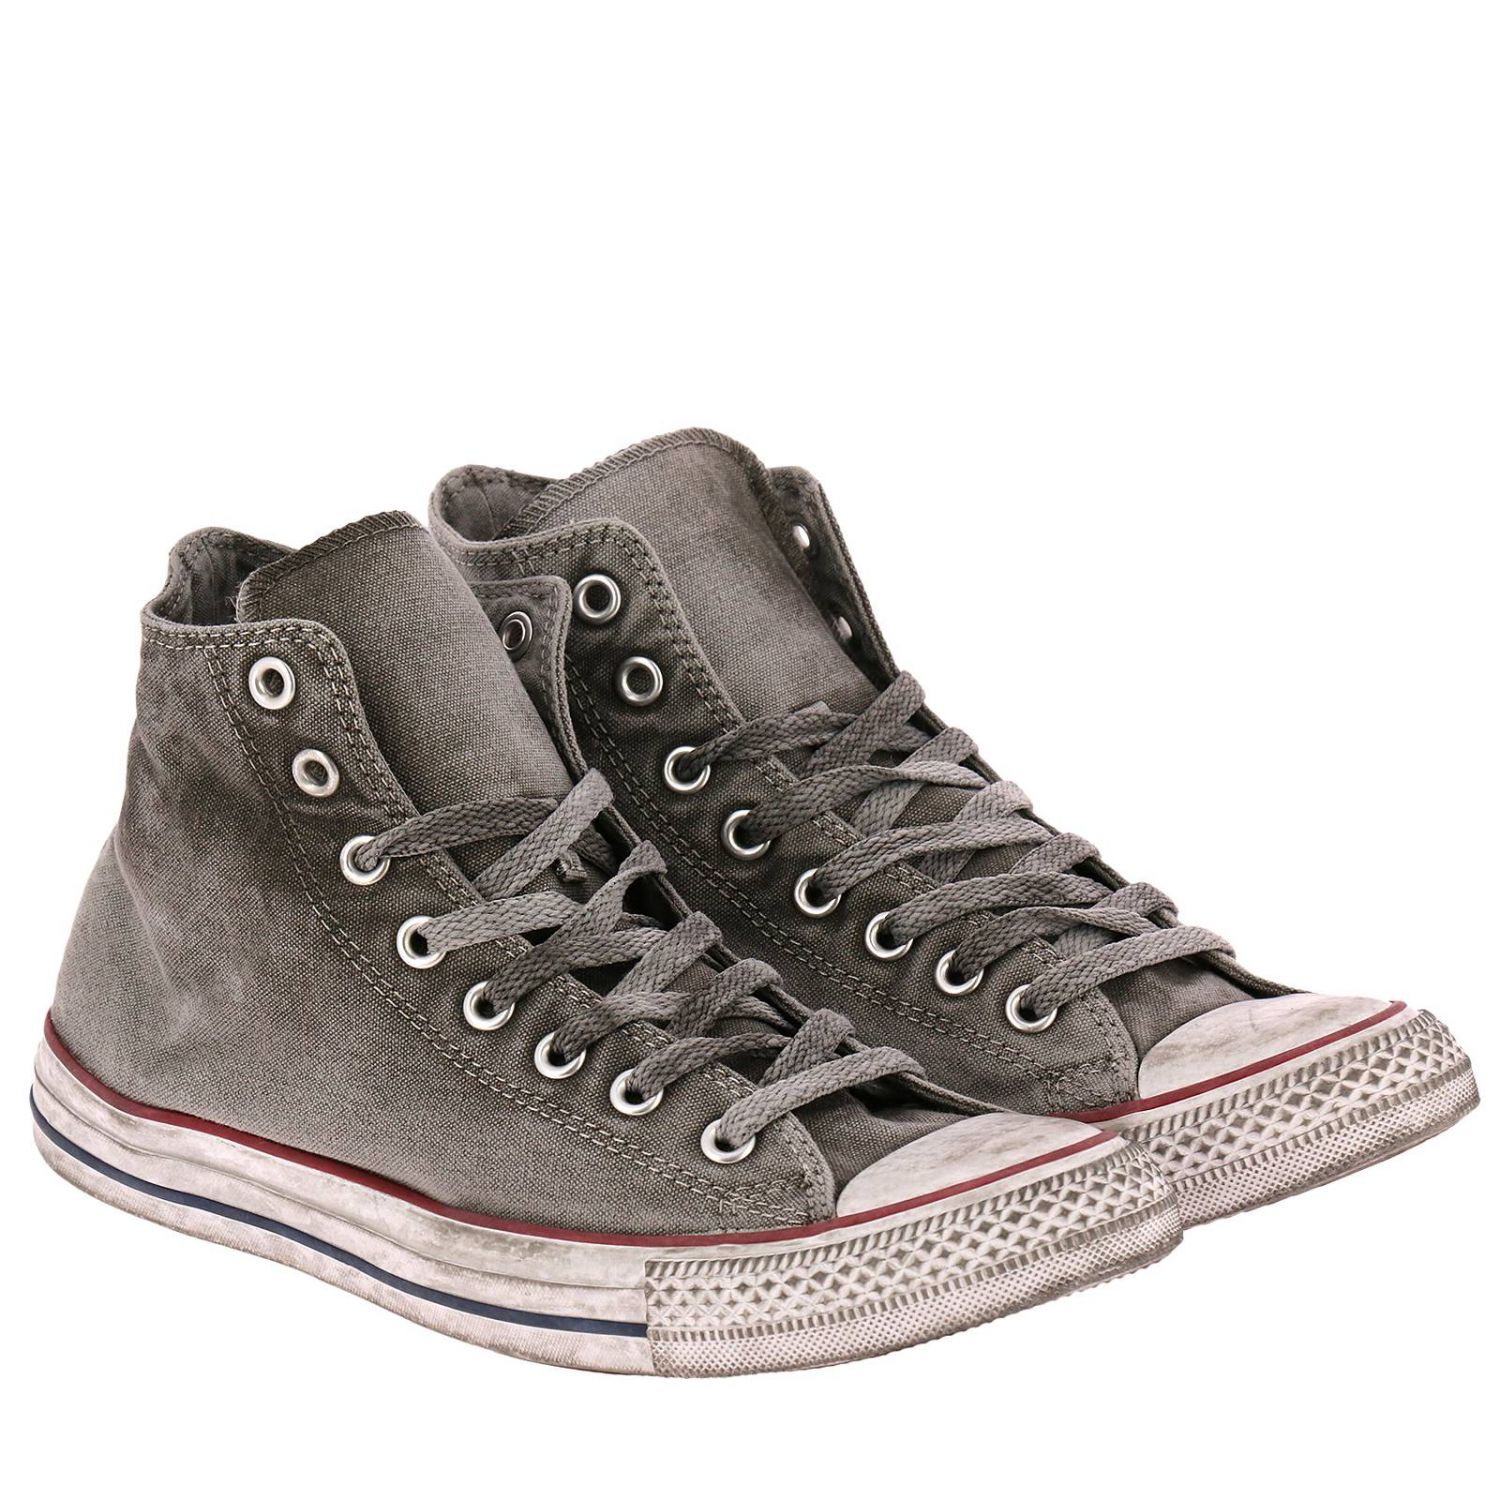 Sneakers All Star Limited Edition in canvas effetto denim used | Sneakers Converse  Limited Edition Uomo Grigio | Sneakers Converse Limited Edition 156885C  Giglio IT